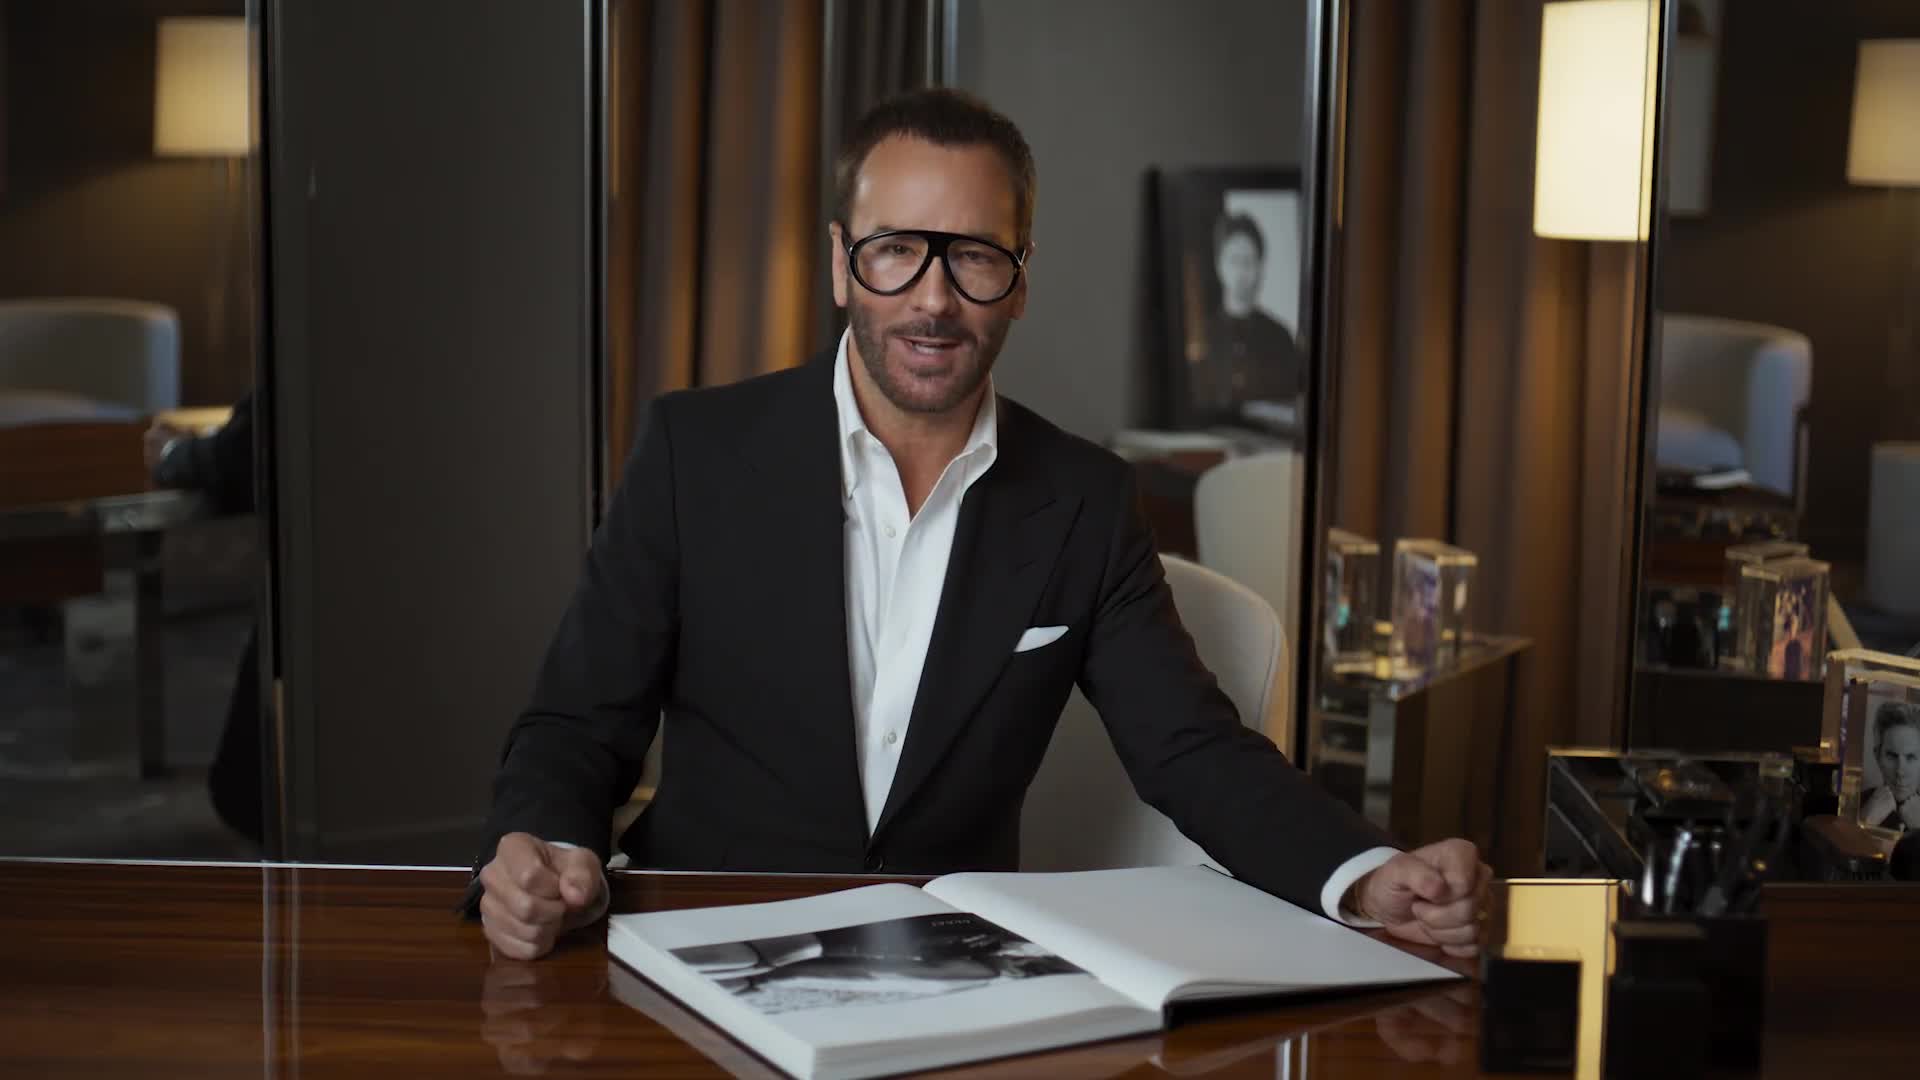 Watch Life in Looks with Tom Ford, Life in Looks